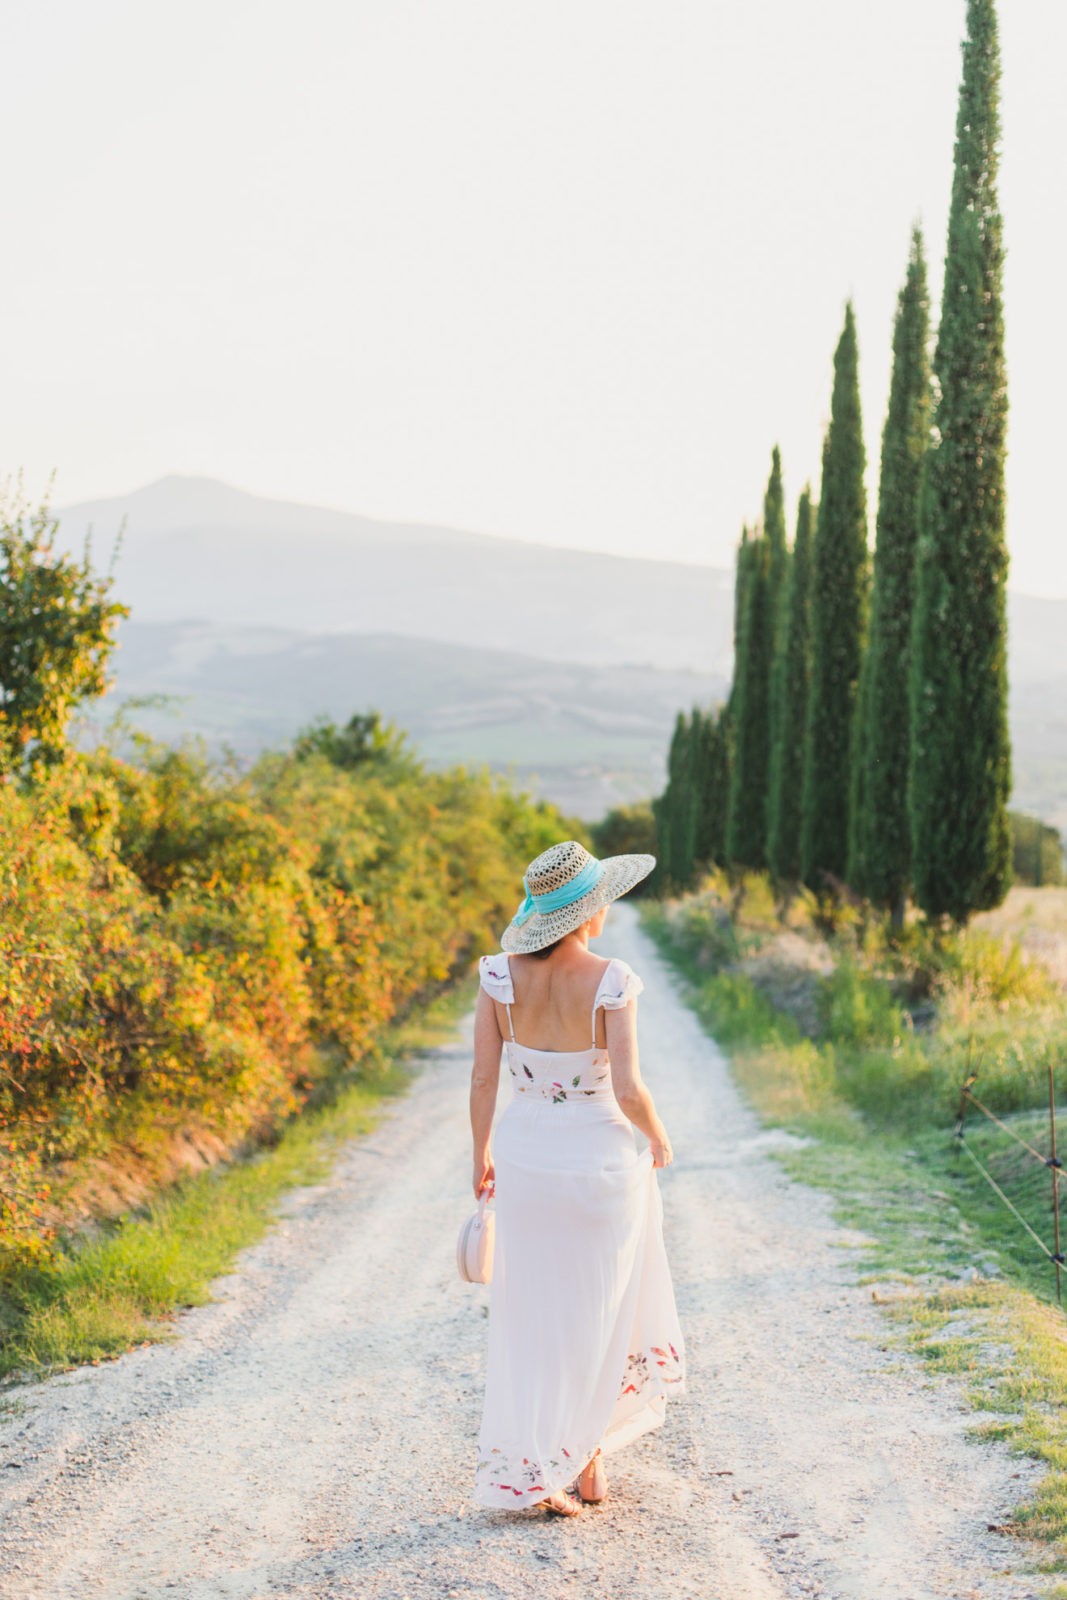 The Tuscan Countryside + Italy Recap by Travel Blogger Laura Lily | How to Take Good Travel Photos by popular California travel blogger, Laura Lily: image of a woman walking down a gravel road in Tuscany, Italy.